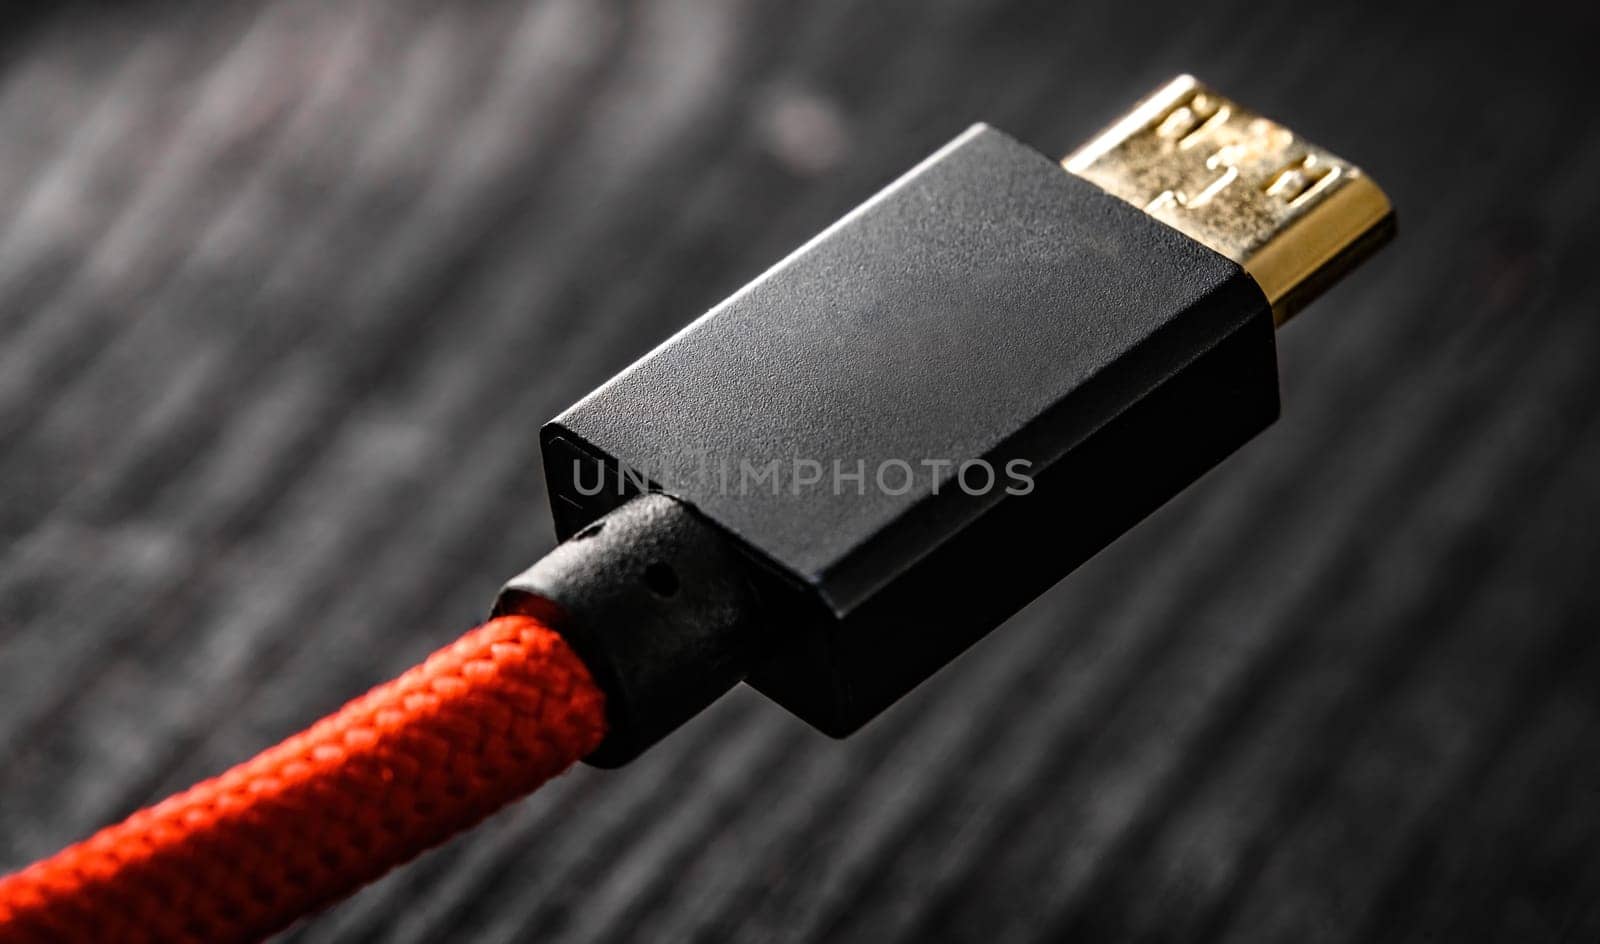 Hdmi Video Connector, Close Up View